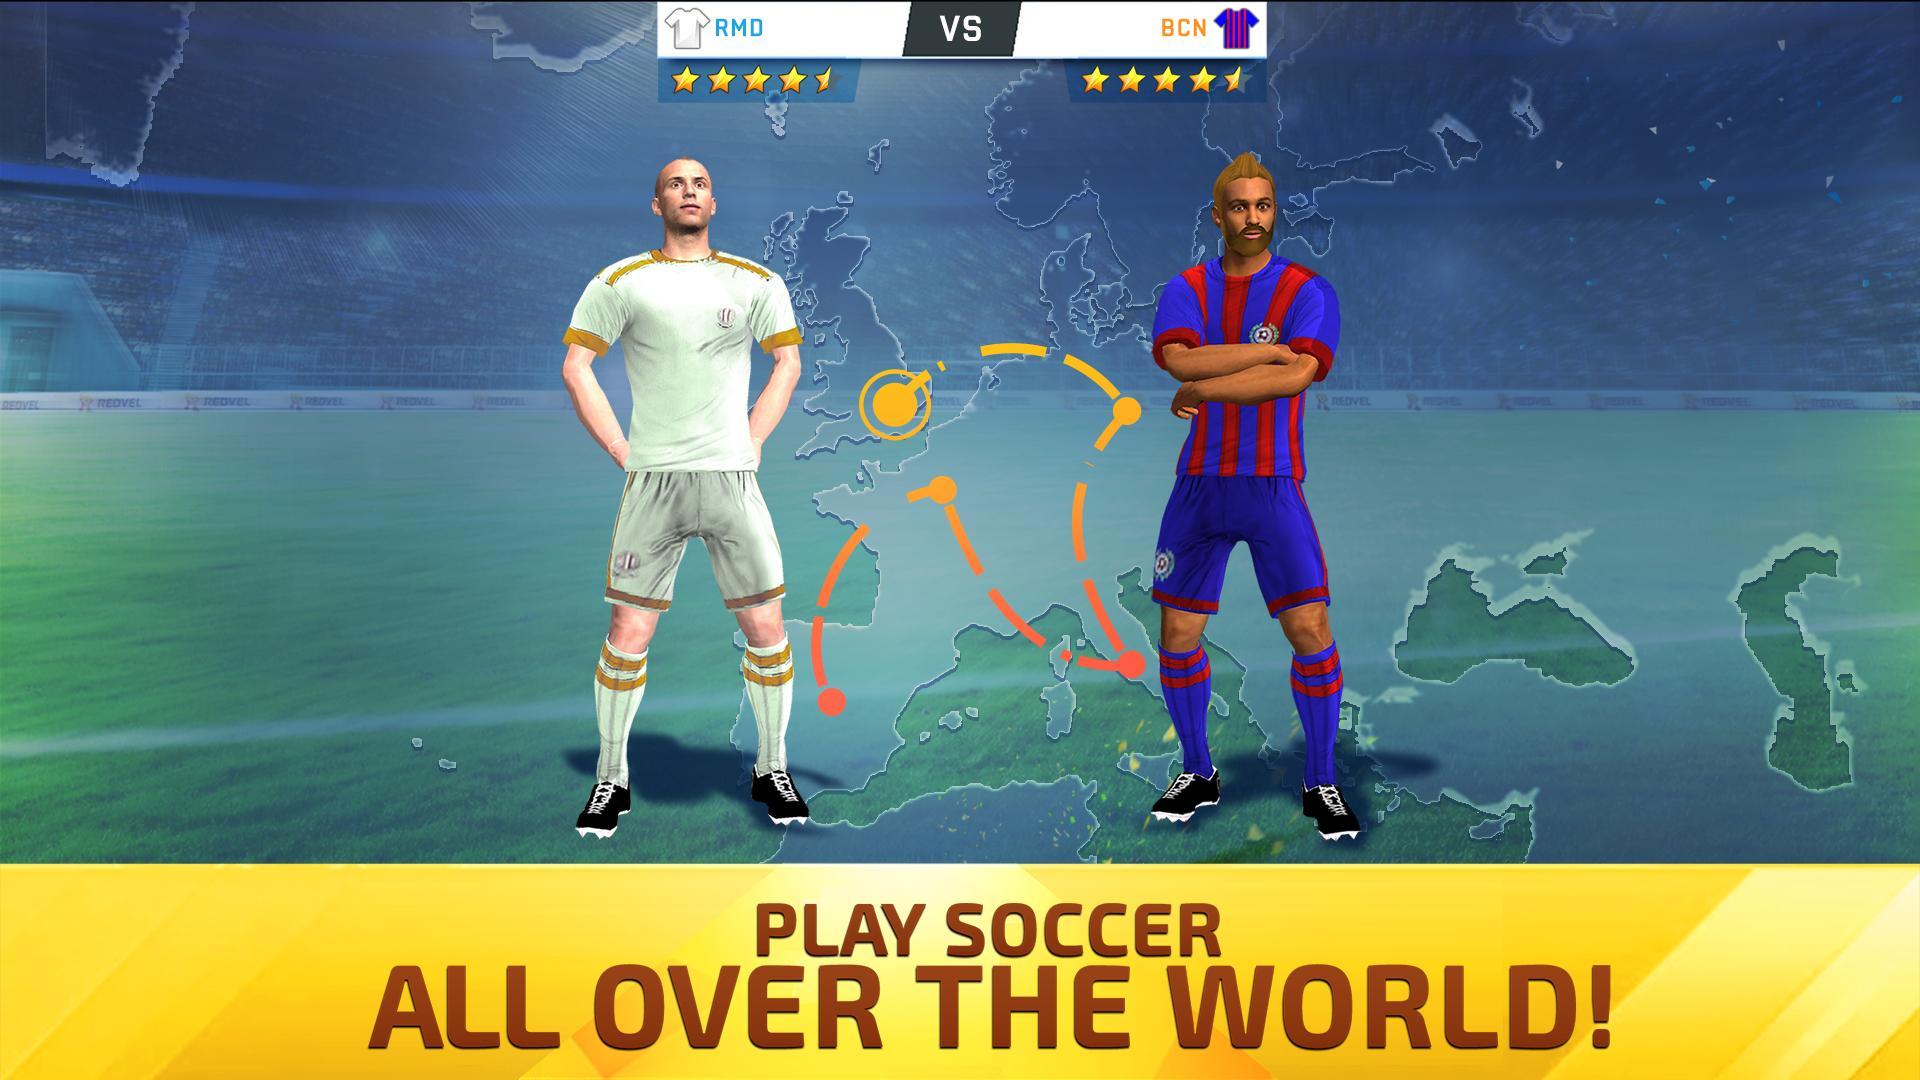 Soccer Star 2020 Top Leagues: Play the SOCCER game 2.4.0 Screenshot 8